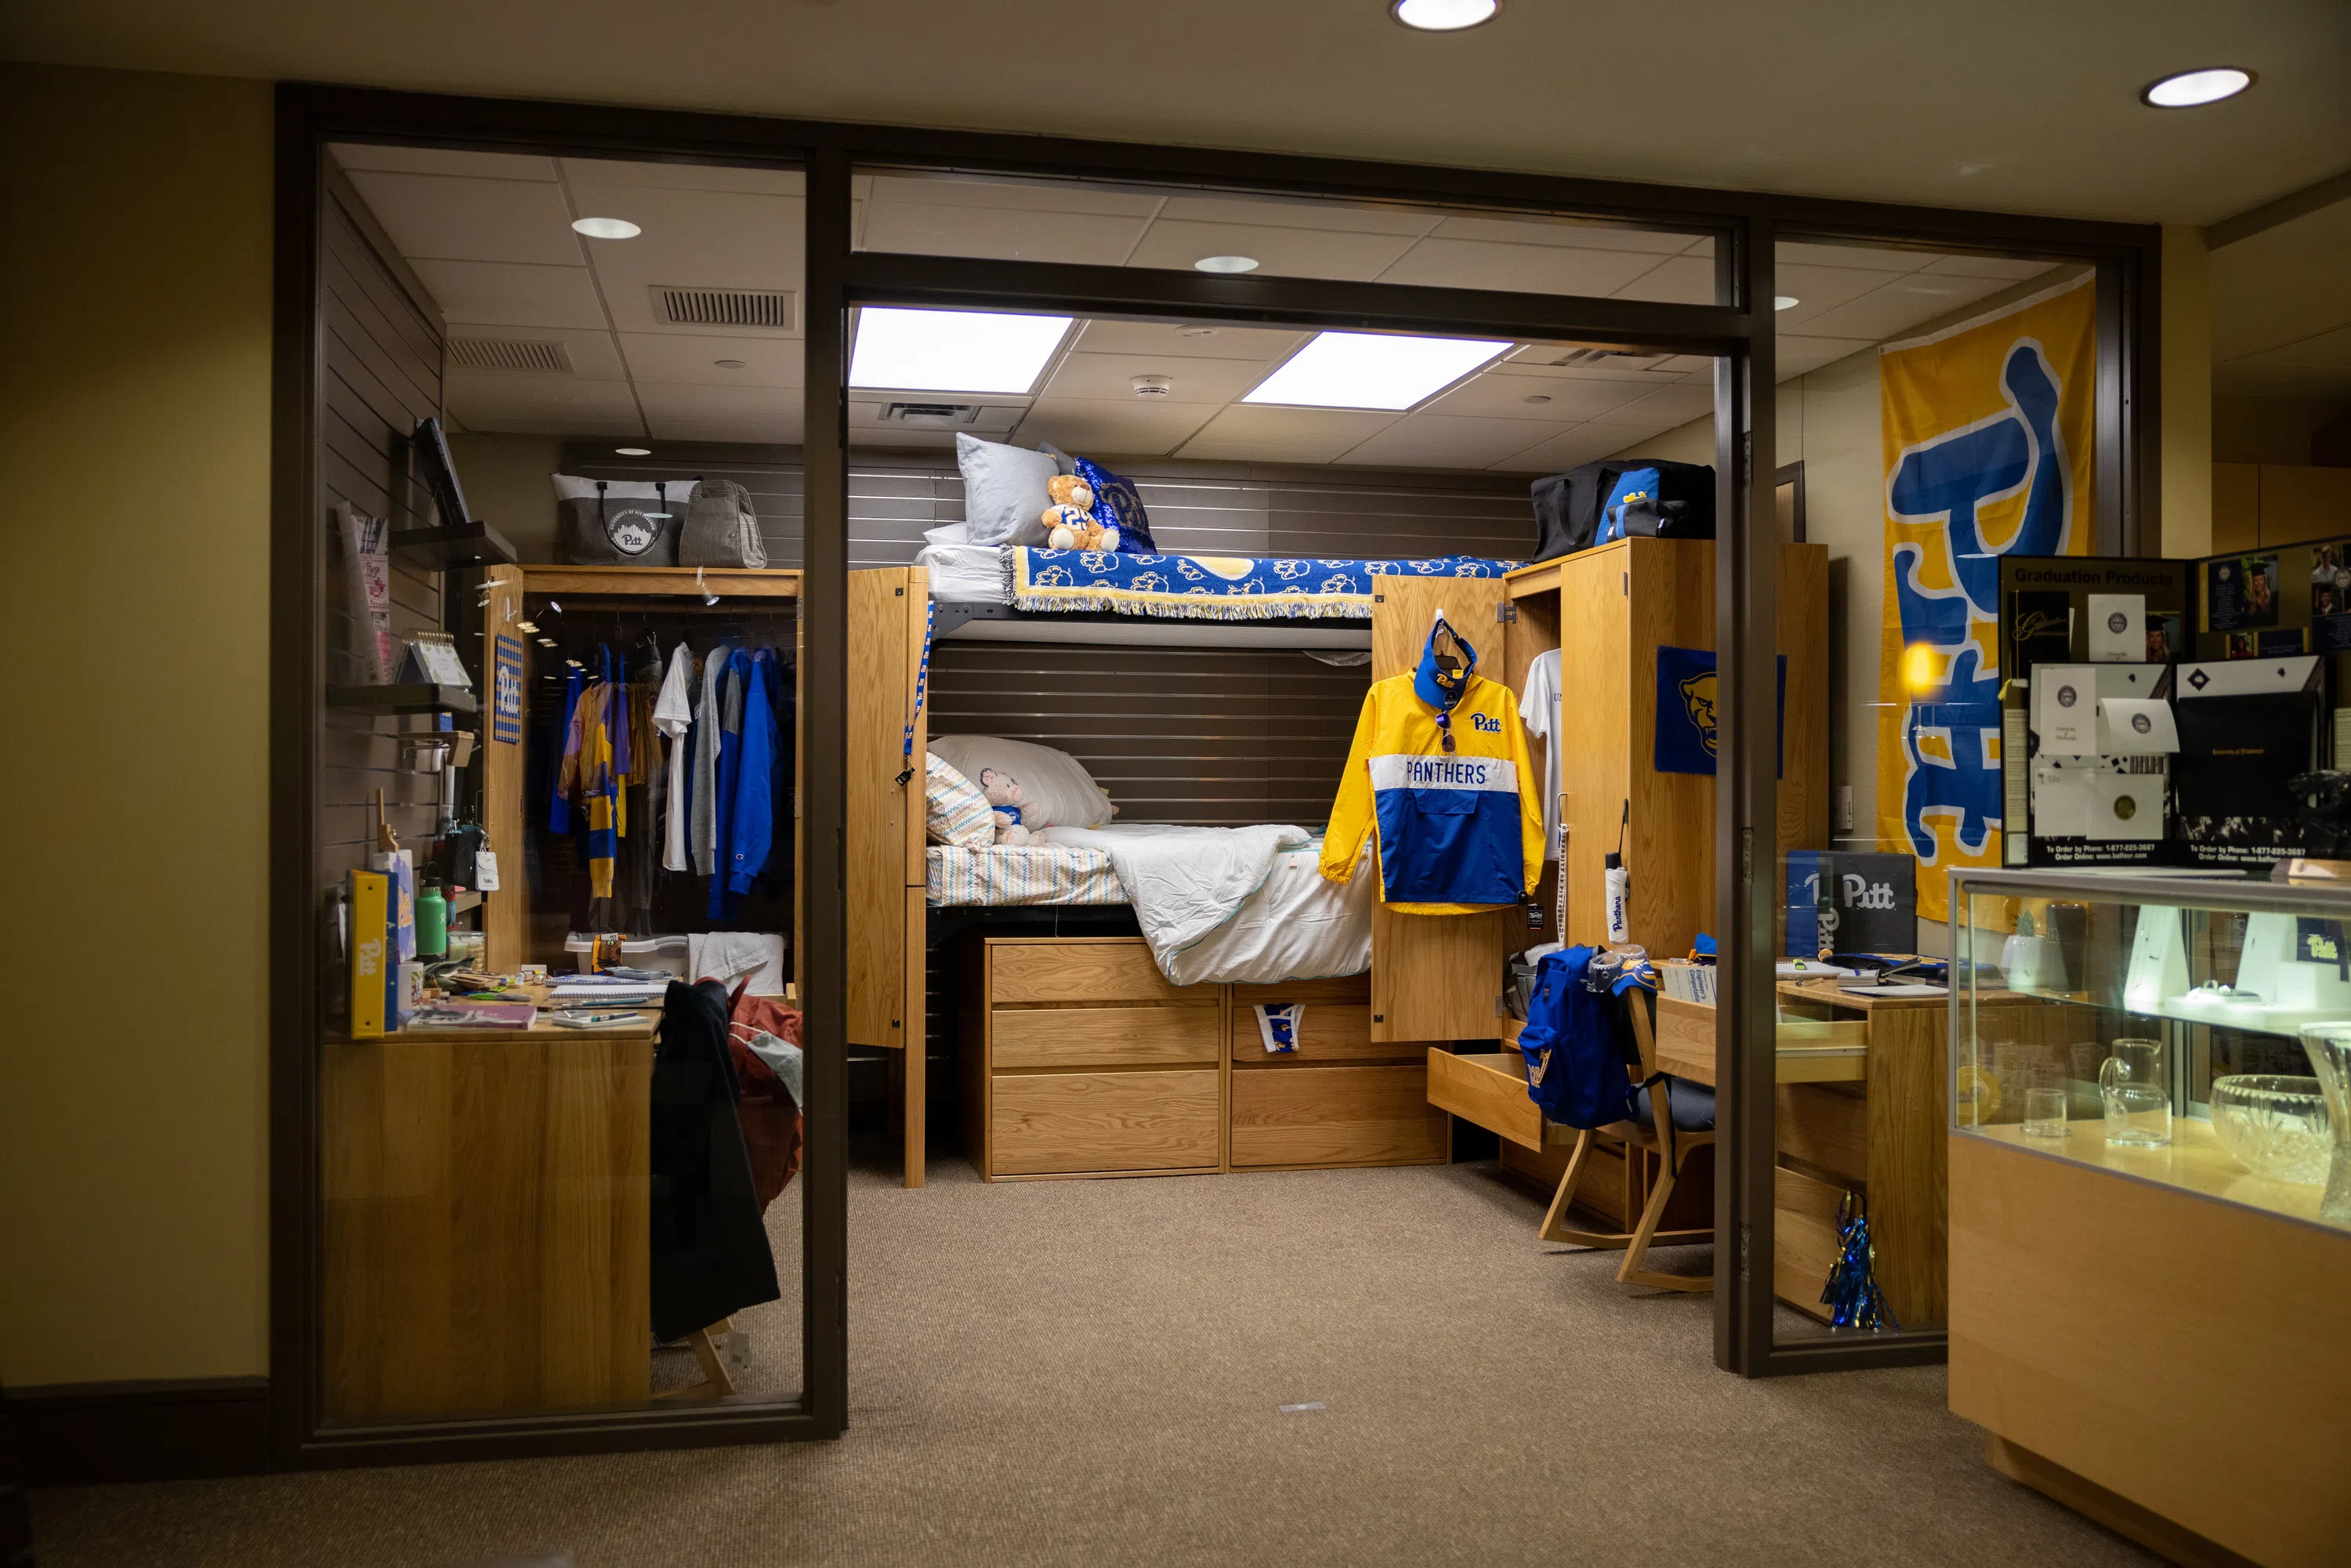 Mock residence hall room found in the University Store